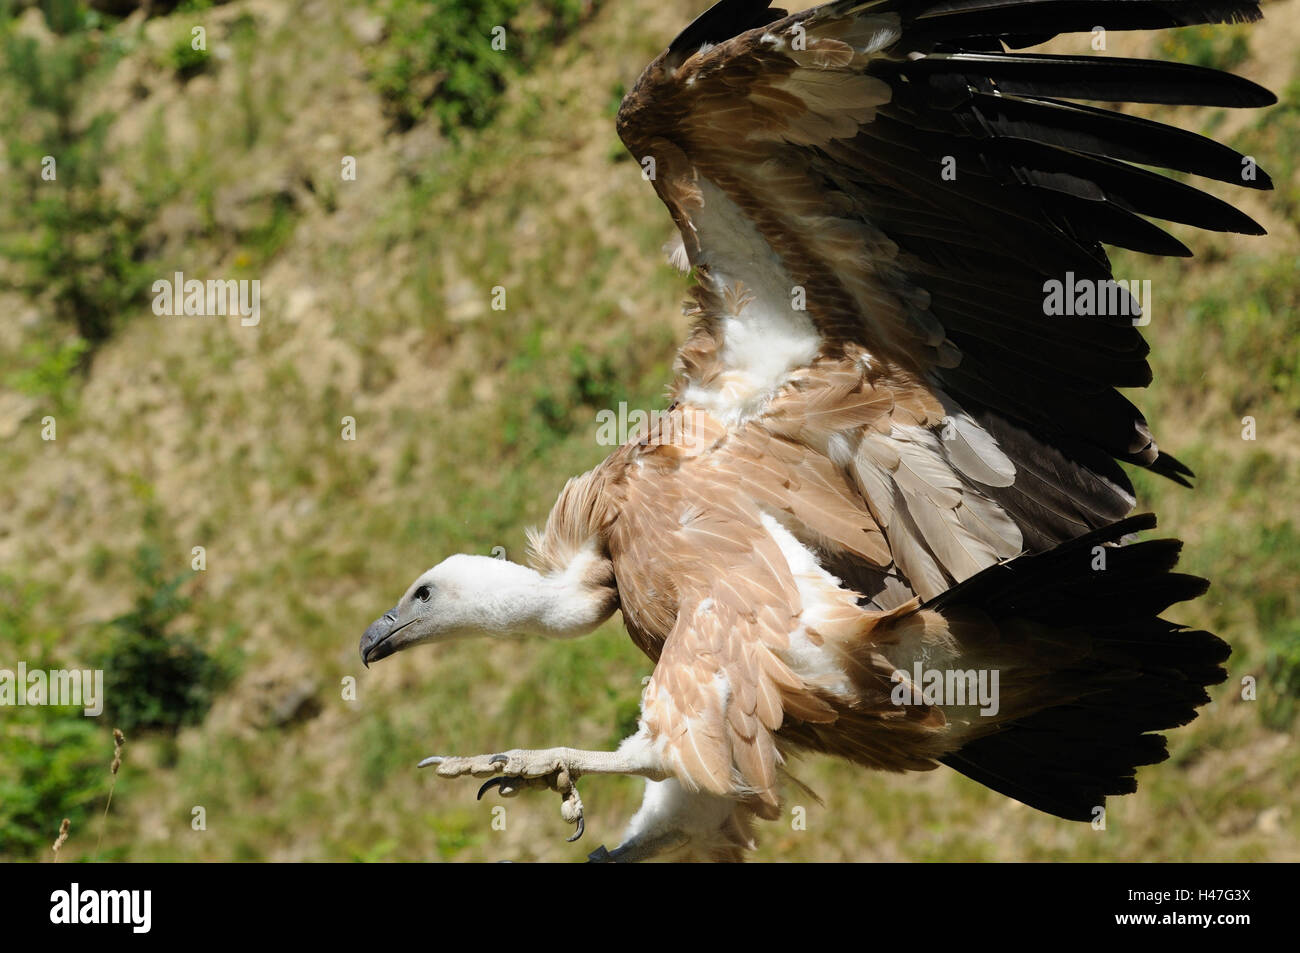 Goose's vultures, Gyps fulvus, side view, fly, focus on the foreground, Stock Photo